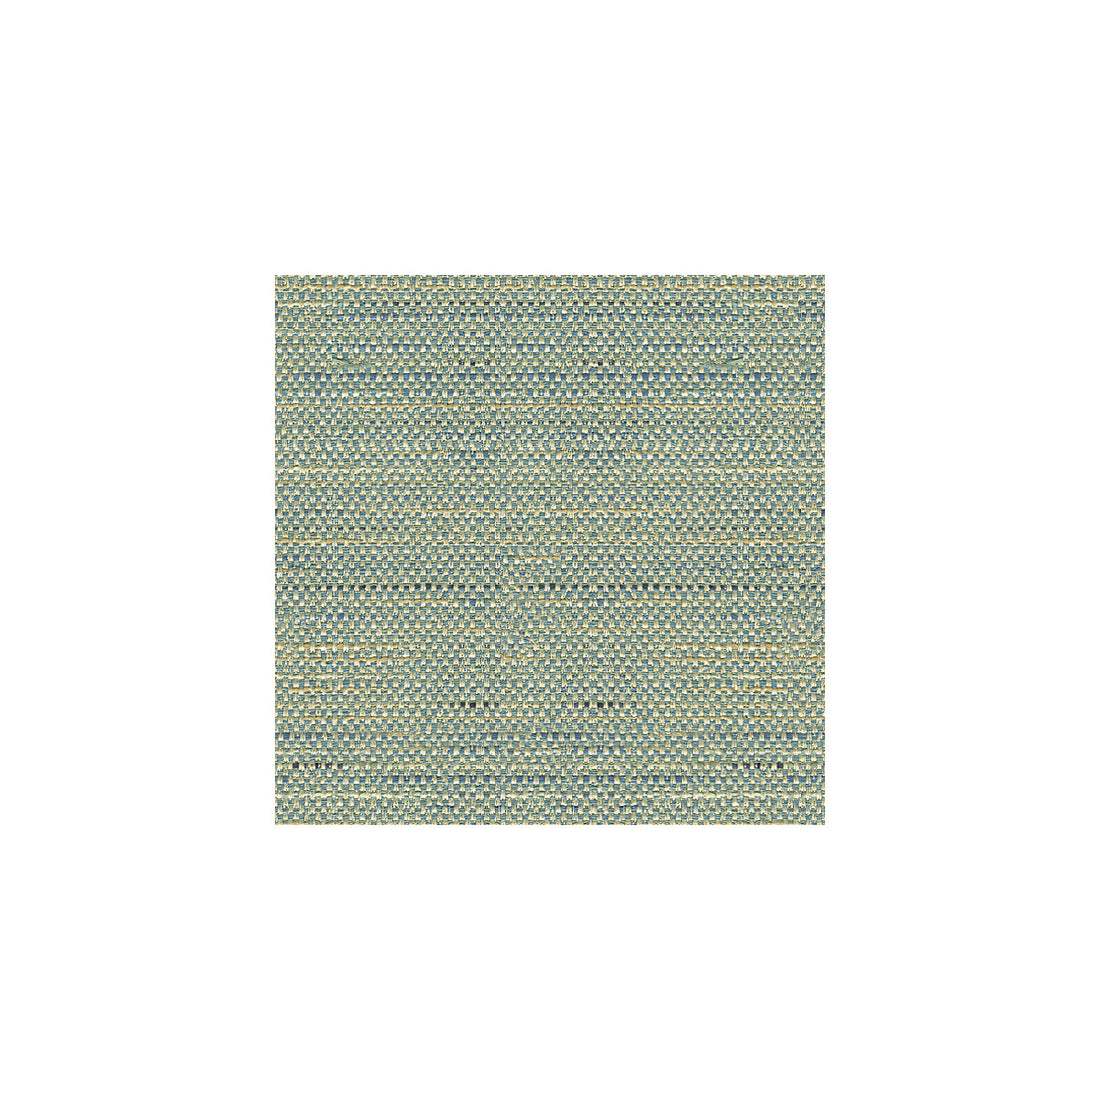 Kravet Basics fabric in 33135-5 color - pattern 33135.5.0 - by Kravet Basics in the Echo Heirloom India collection